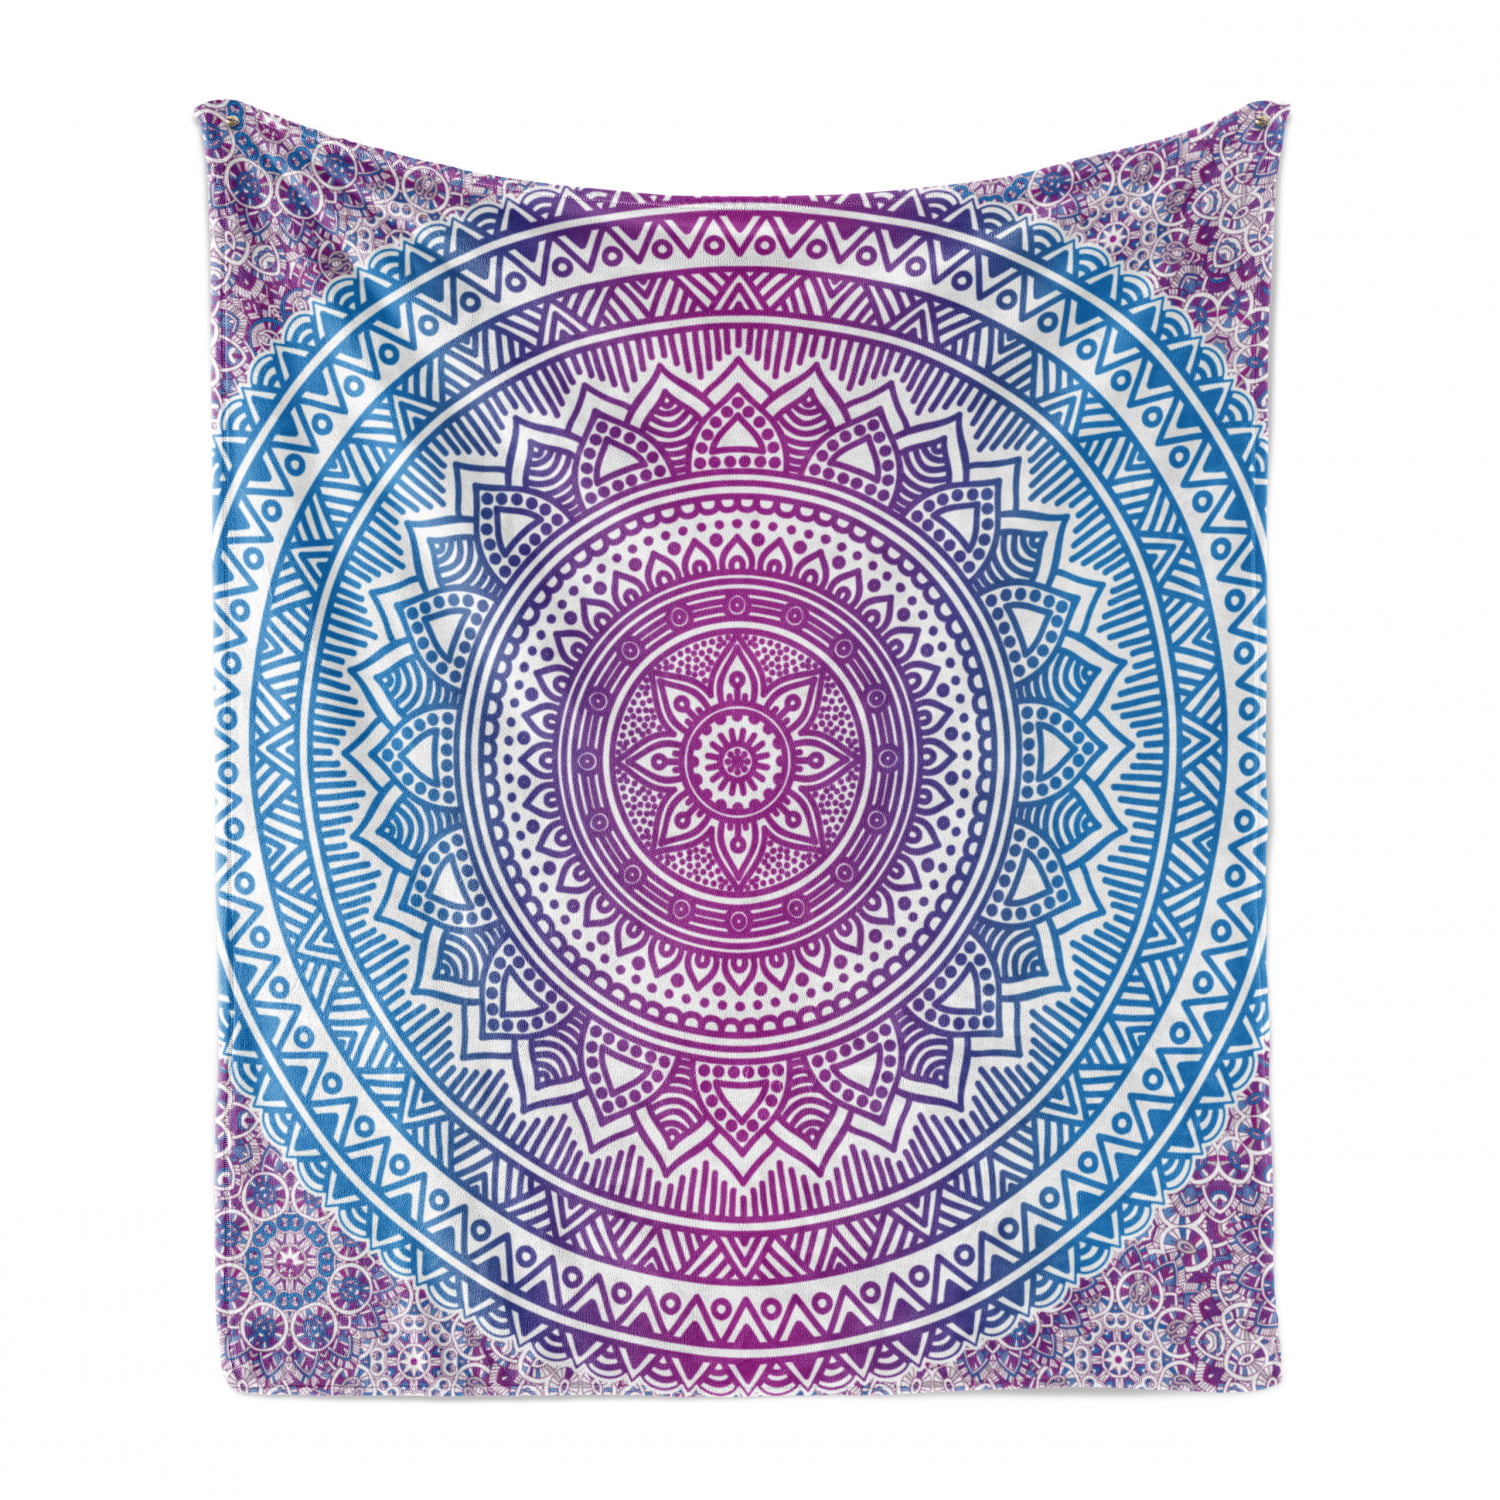 Cozy Plush for Indoor and Outdoor Use Ombre Mandala Floral Star Medallion Pattern Style Bohemian Blue White and Violet Ambesonne Blue and Pink Soft Flannel Fleece Throw Blanket 70 x 90 